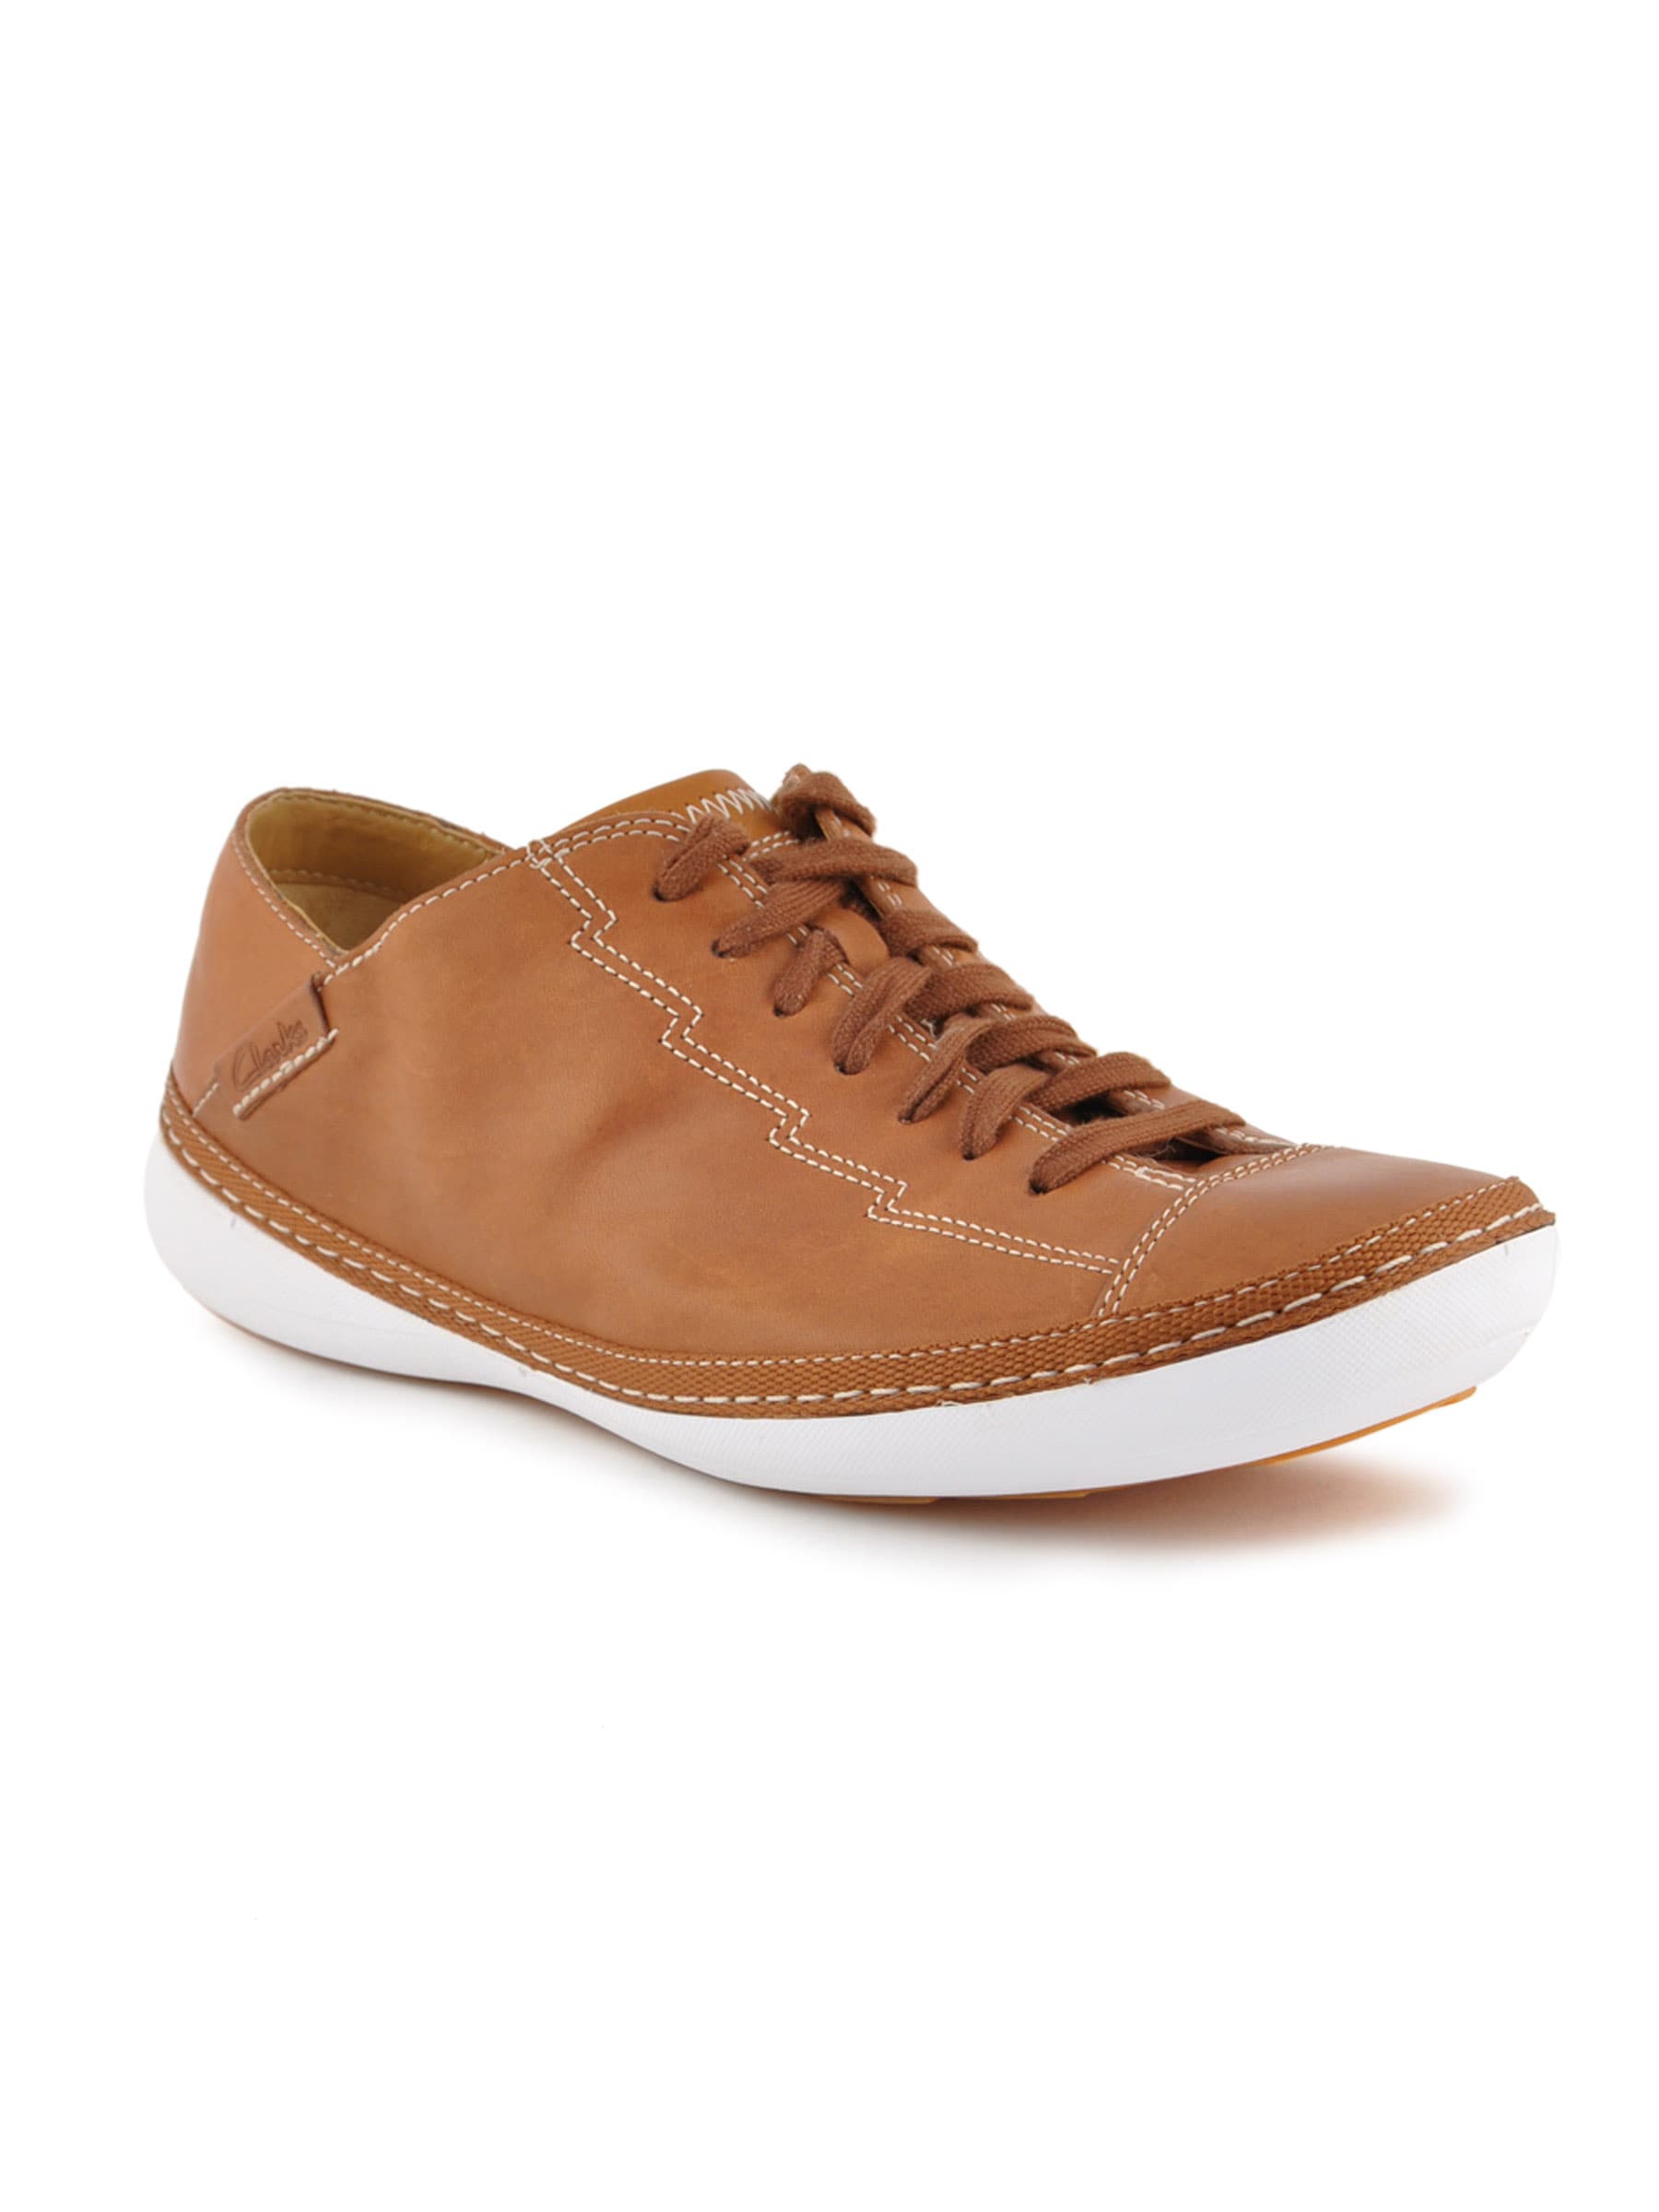 Clarks Men Rocco Fuse Brown Casual Shoes